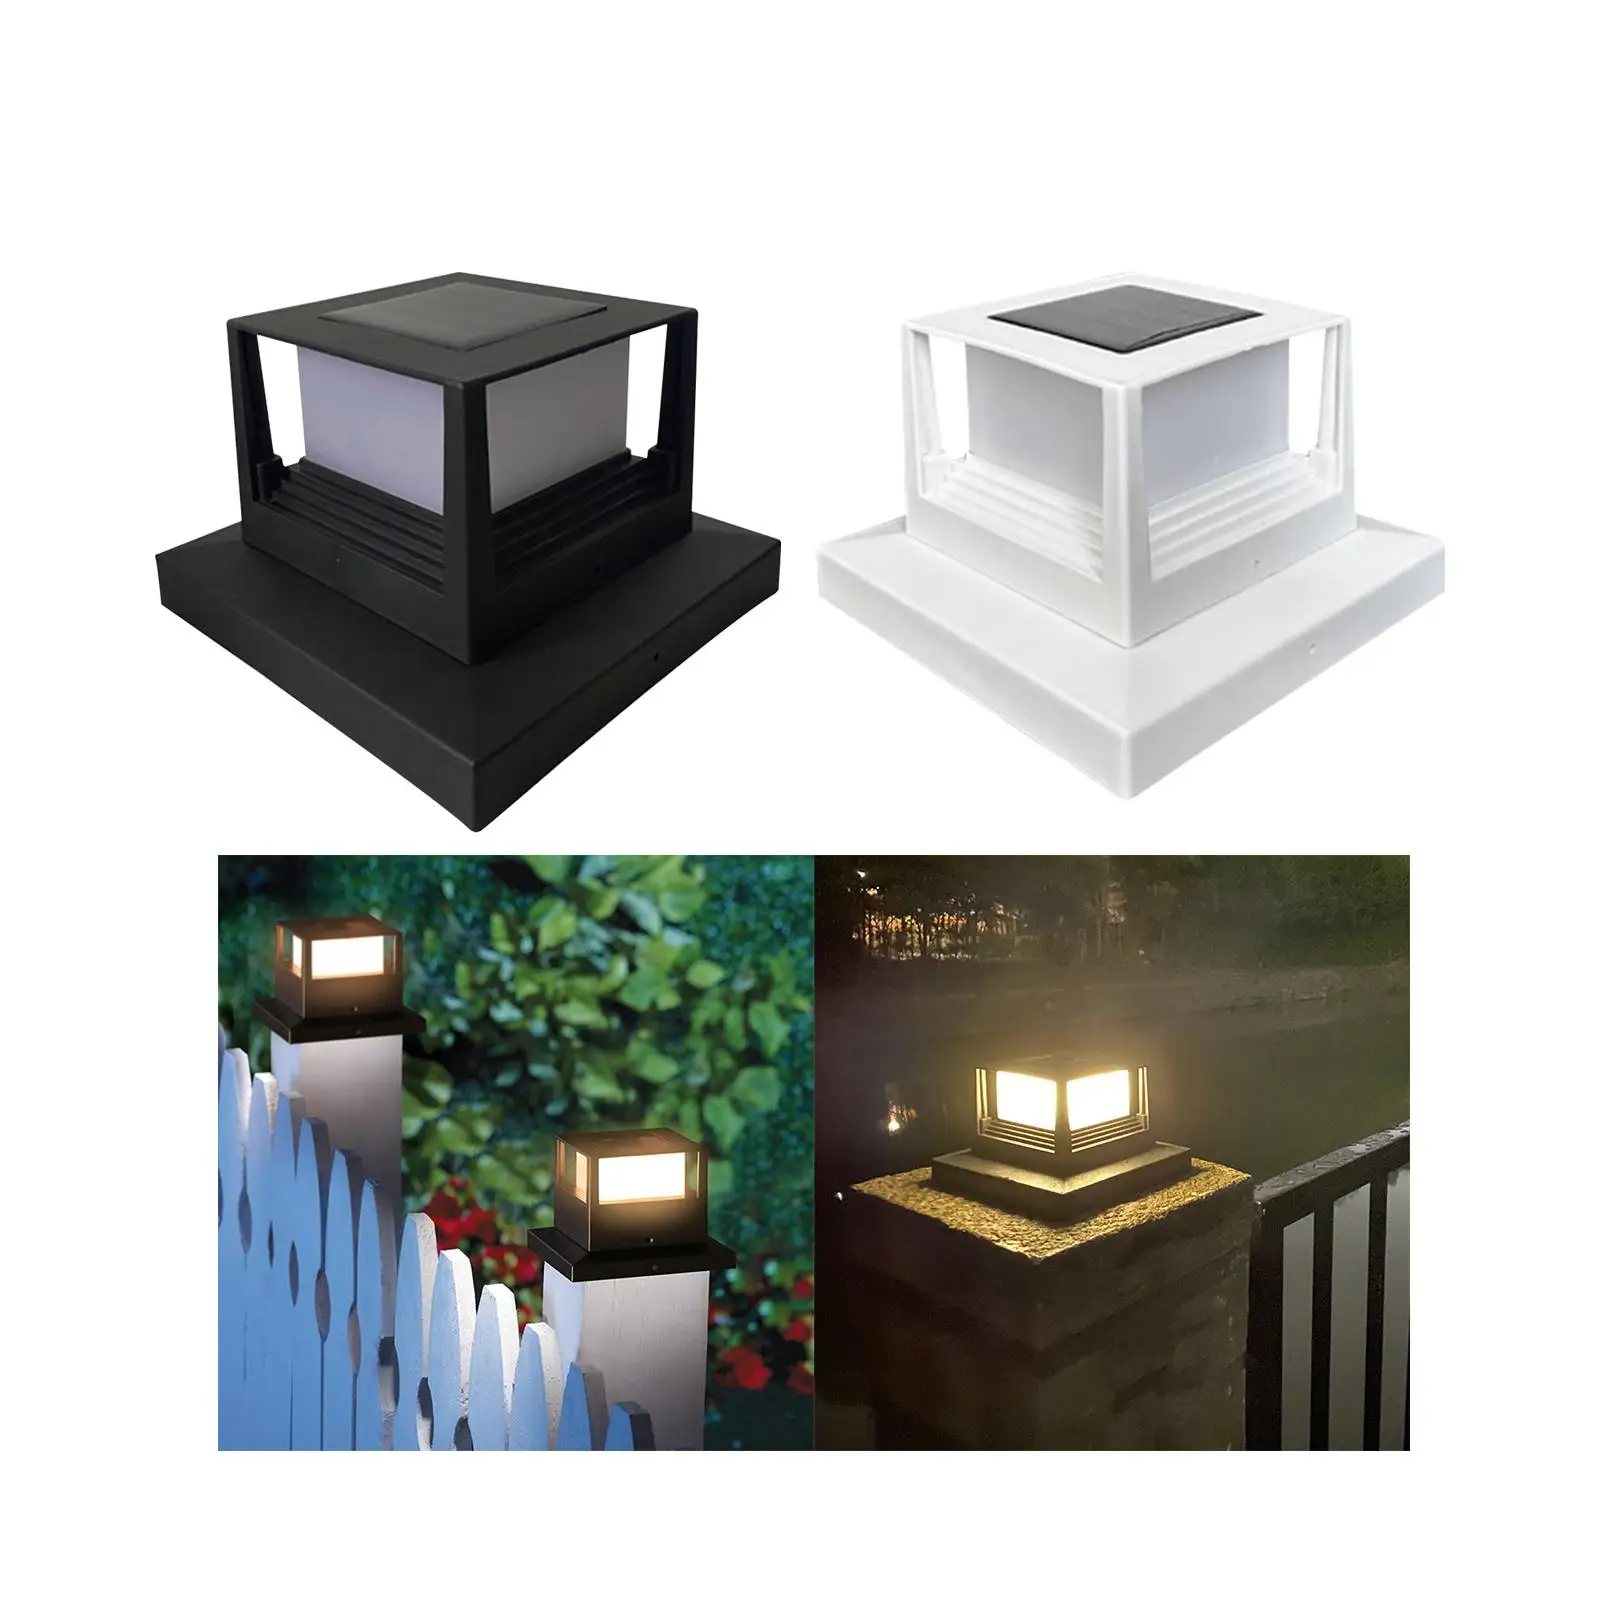 Solar Post Light Outdoor Warm White LED Lighting IP44 Waterproof Outside Light for Garden Patio Decor Deck Courtyard Pathway